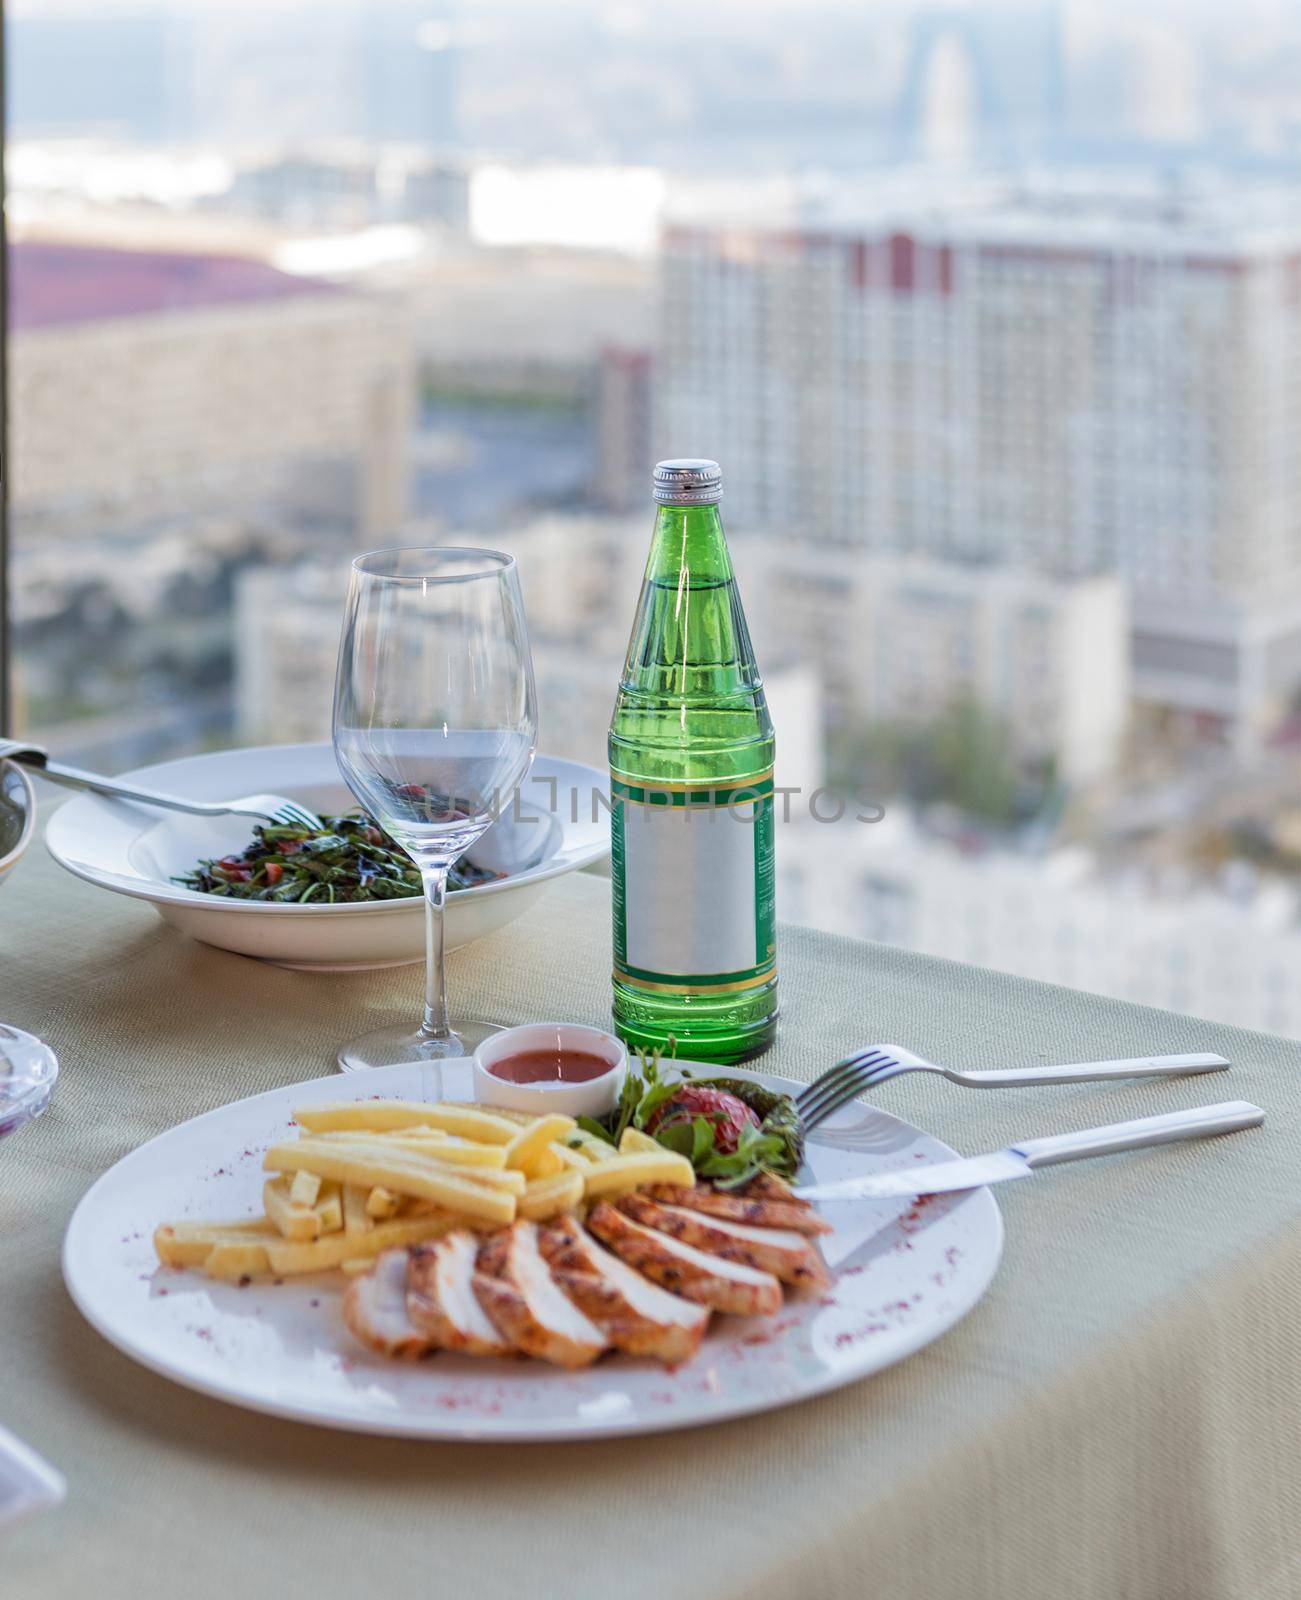 Fried chicken with french fries, water bottle and city view by ferhad